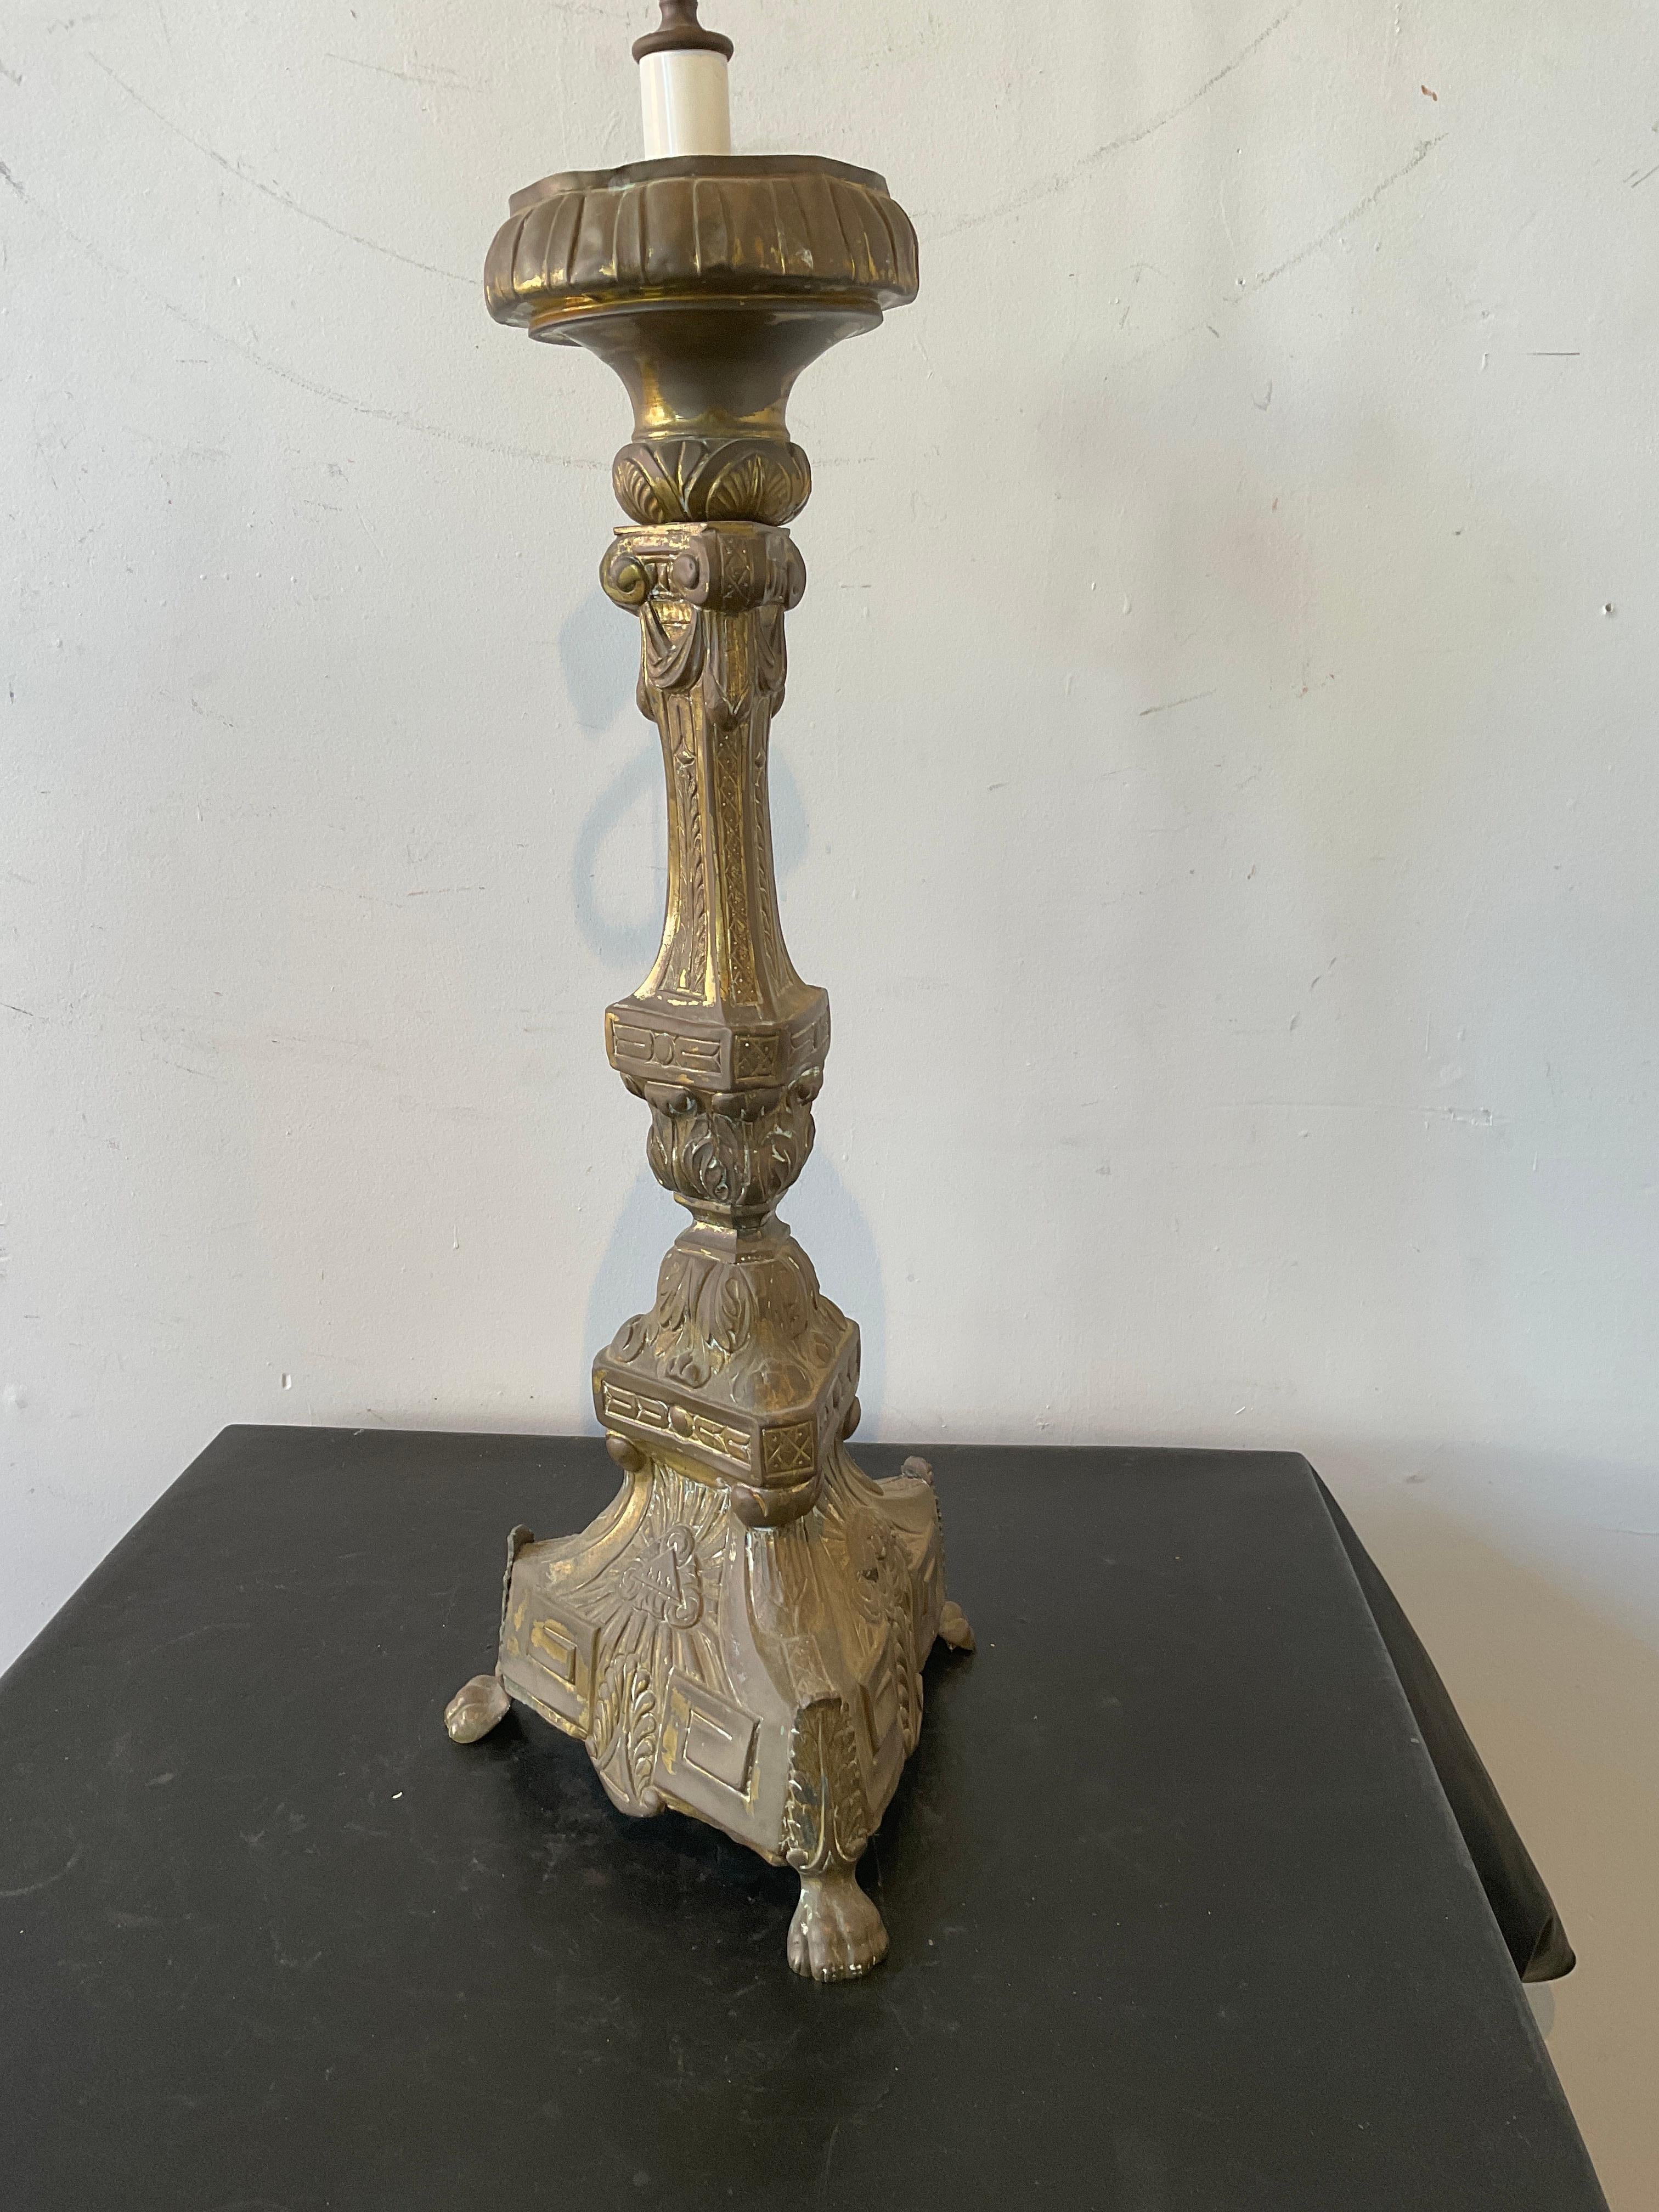 1880s Brass Church Candlestick Lamp In Good Condition For Sale In Tarrytown, NY